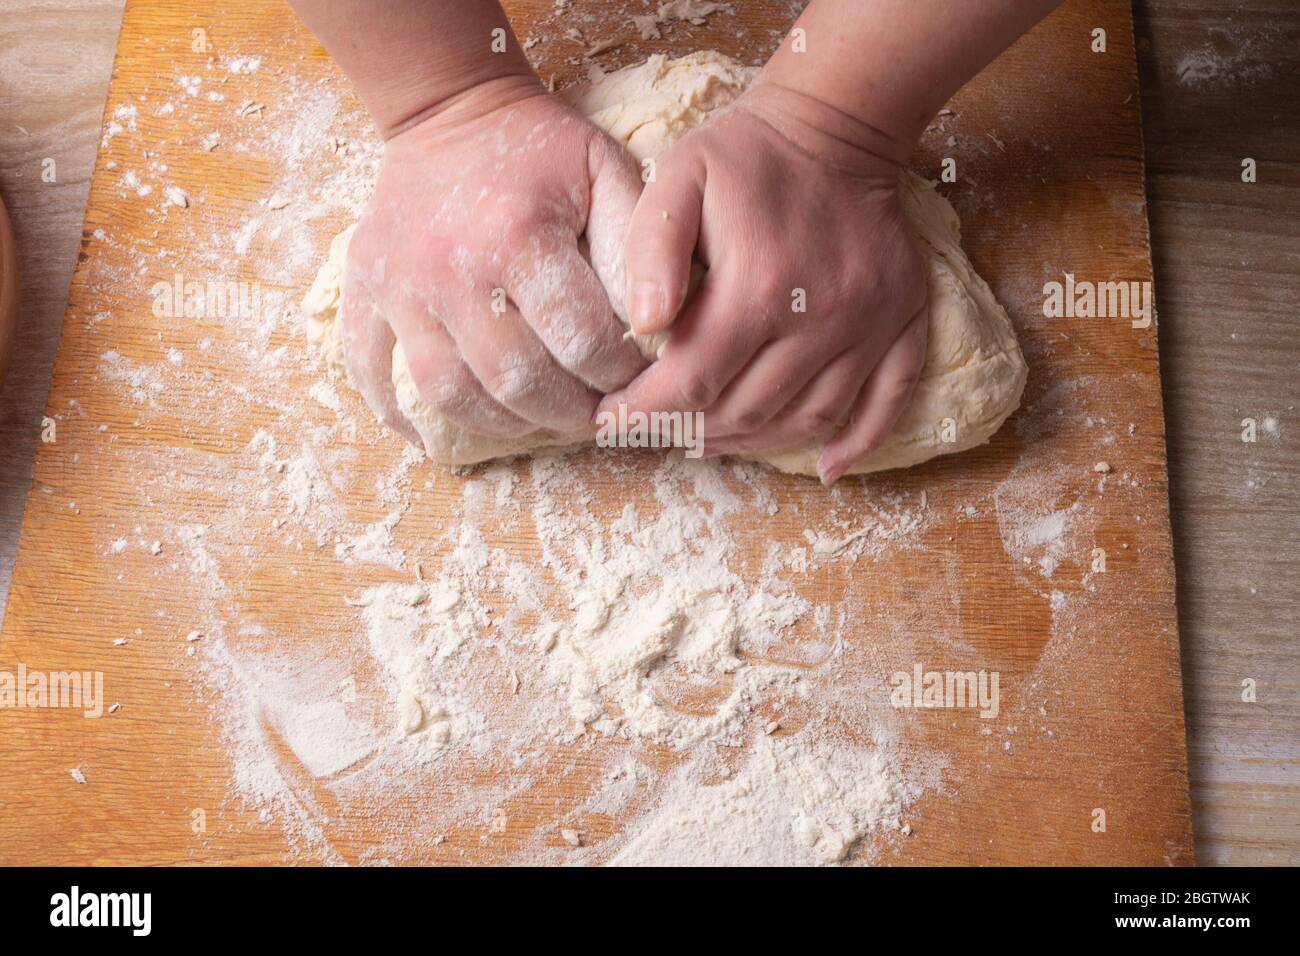 Female hands mixing dough in the home kitchen. Stock Photo